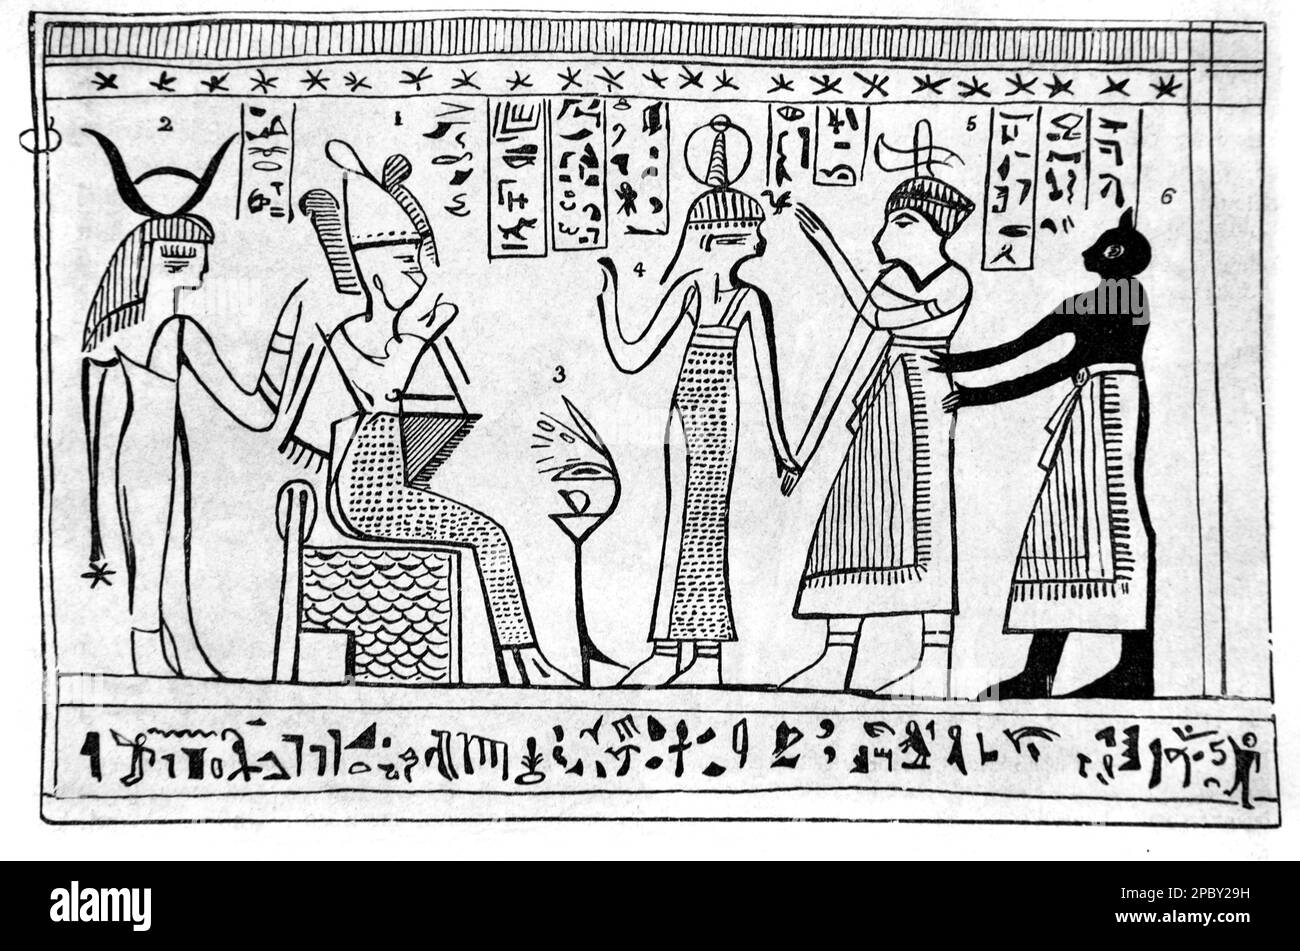 Section of the Joseph Smith Papyri (JSP), actually part of the Egyptian Book of the Dead, recounted in Egyptian Hieroglyphs. Vintage Engraving or Illustration 1862 Stock Photo